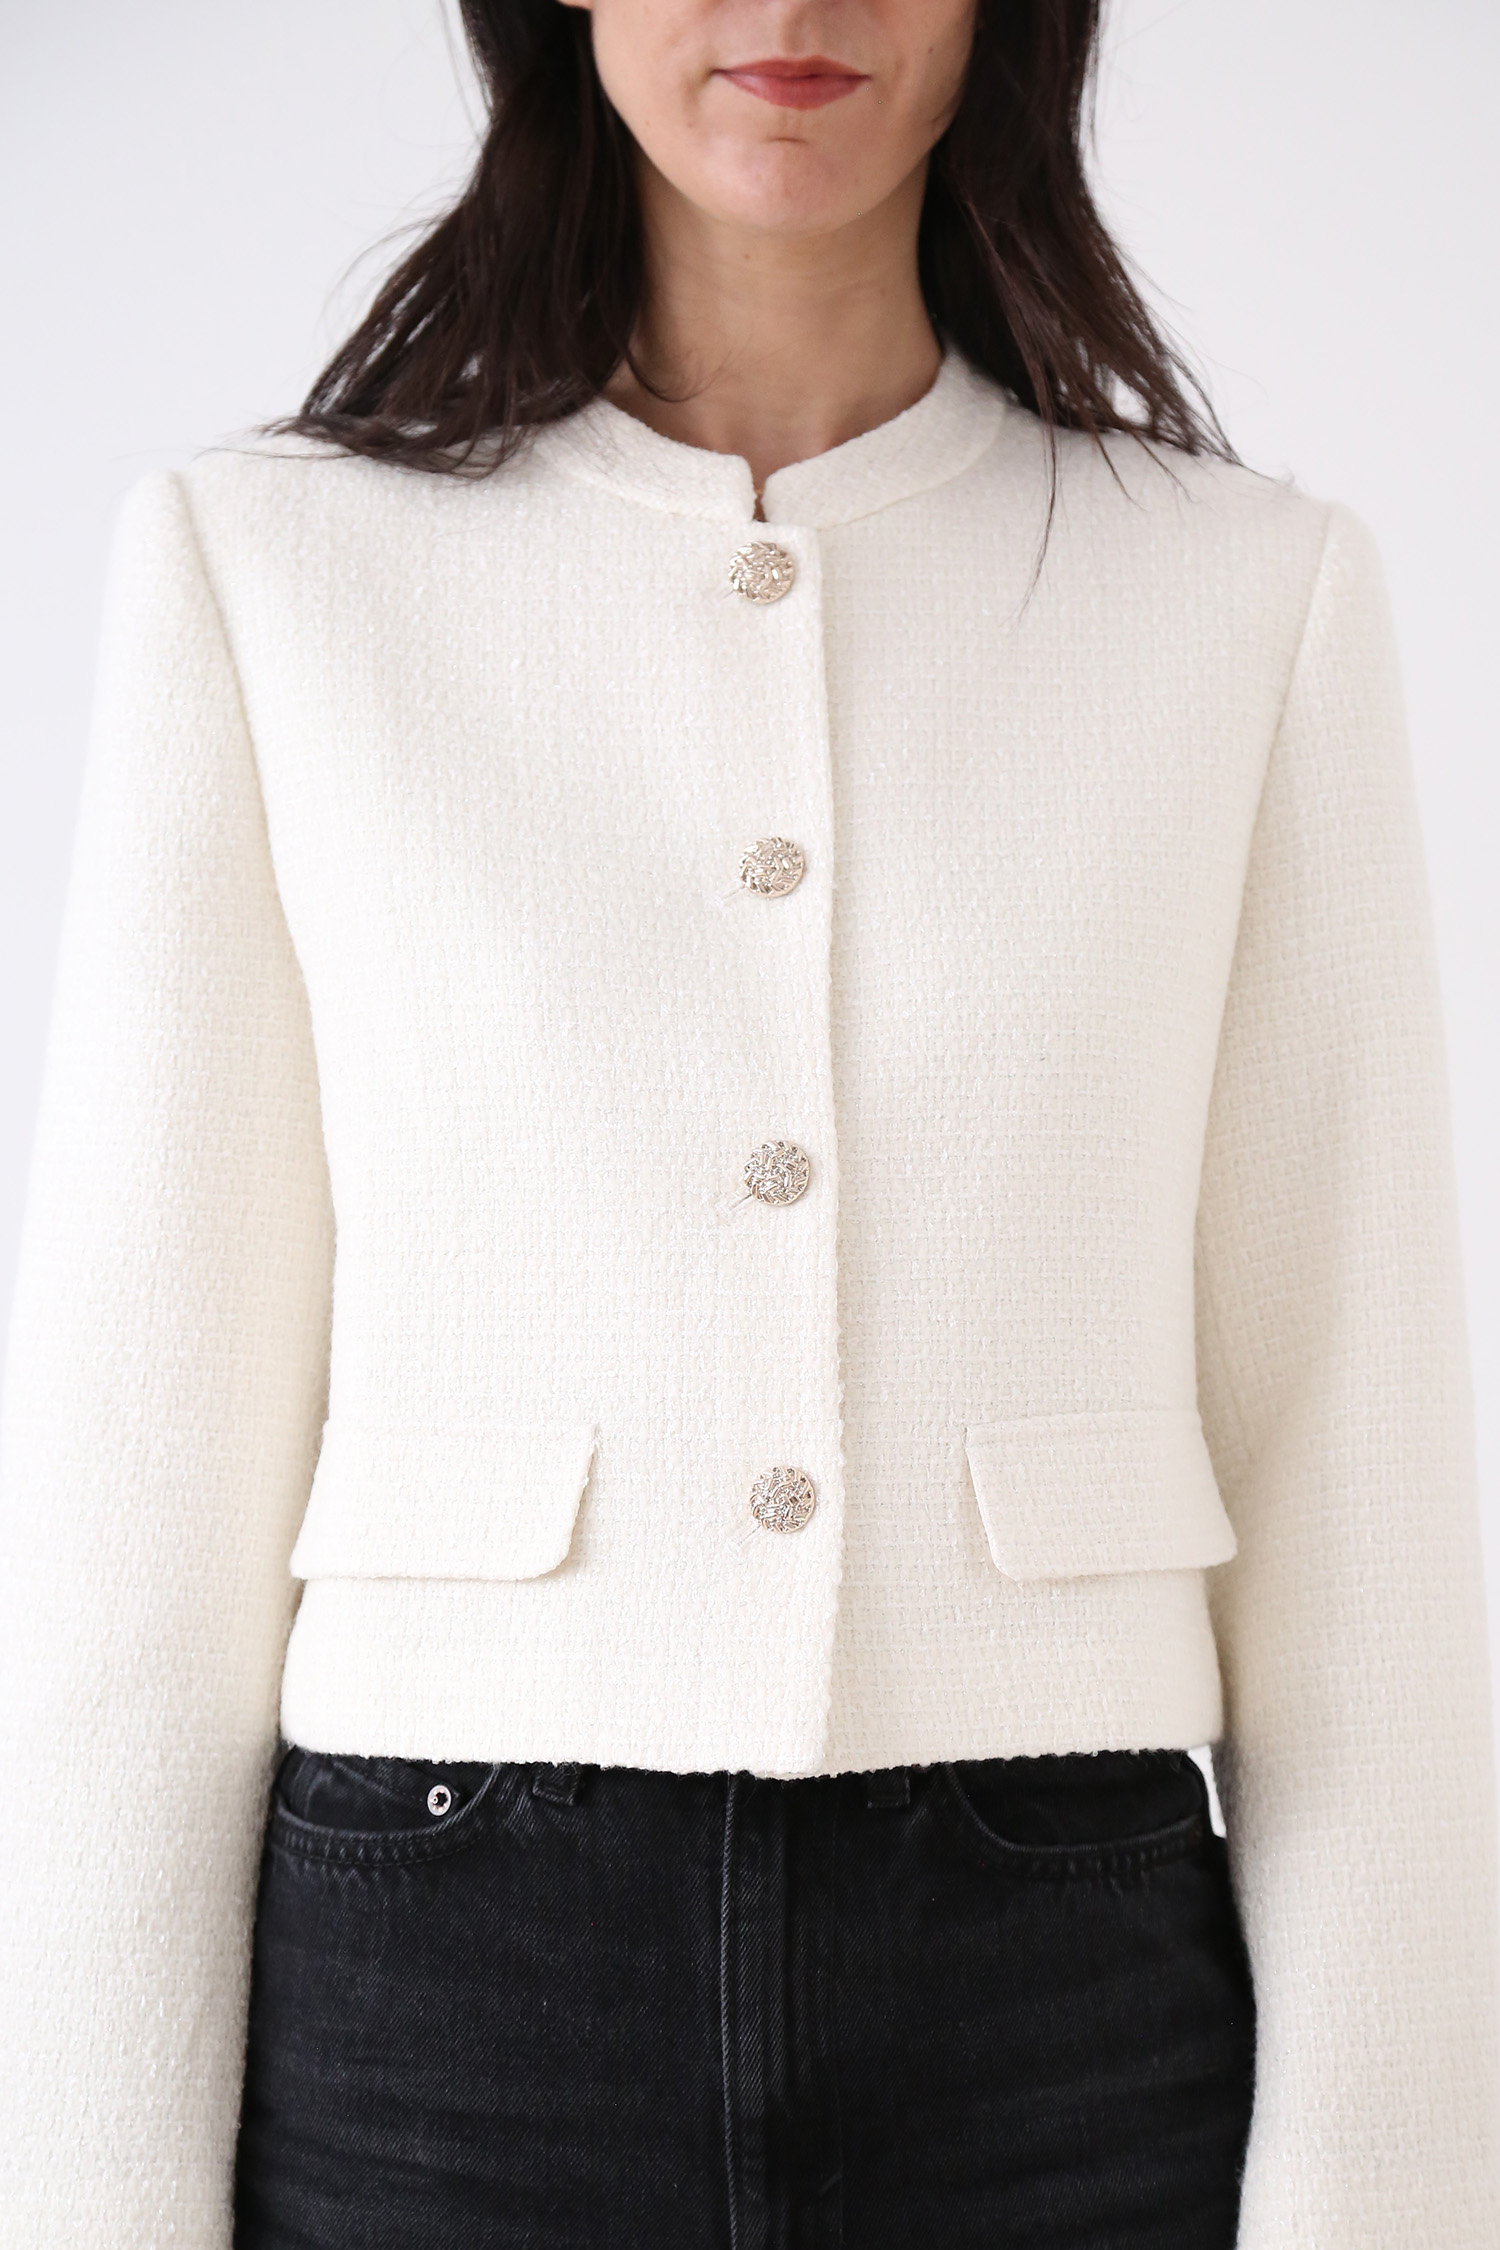 Ladylike quiet luxury jacket in white with silver thread